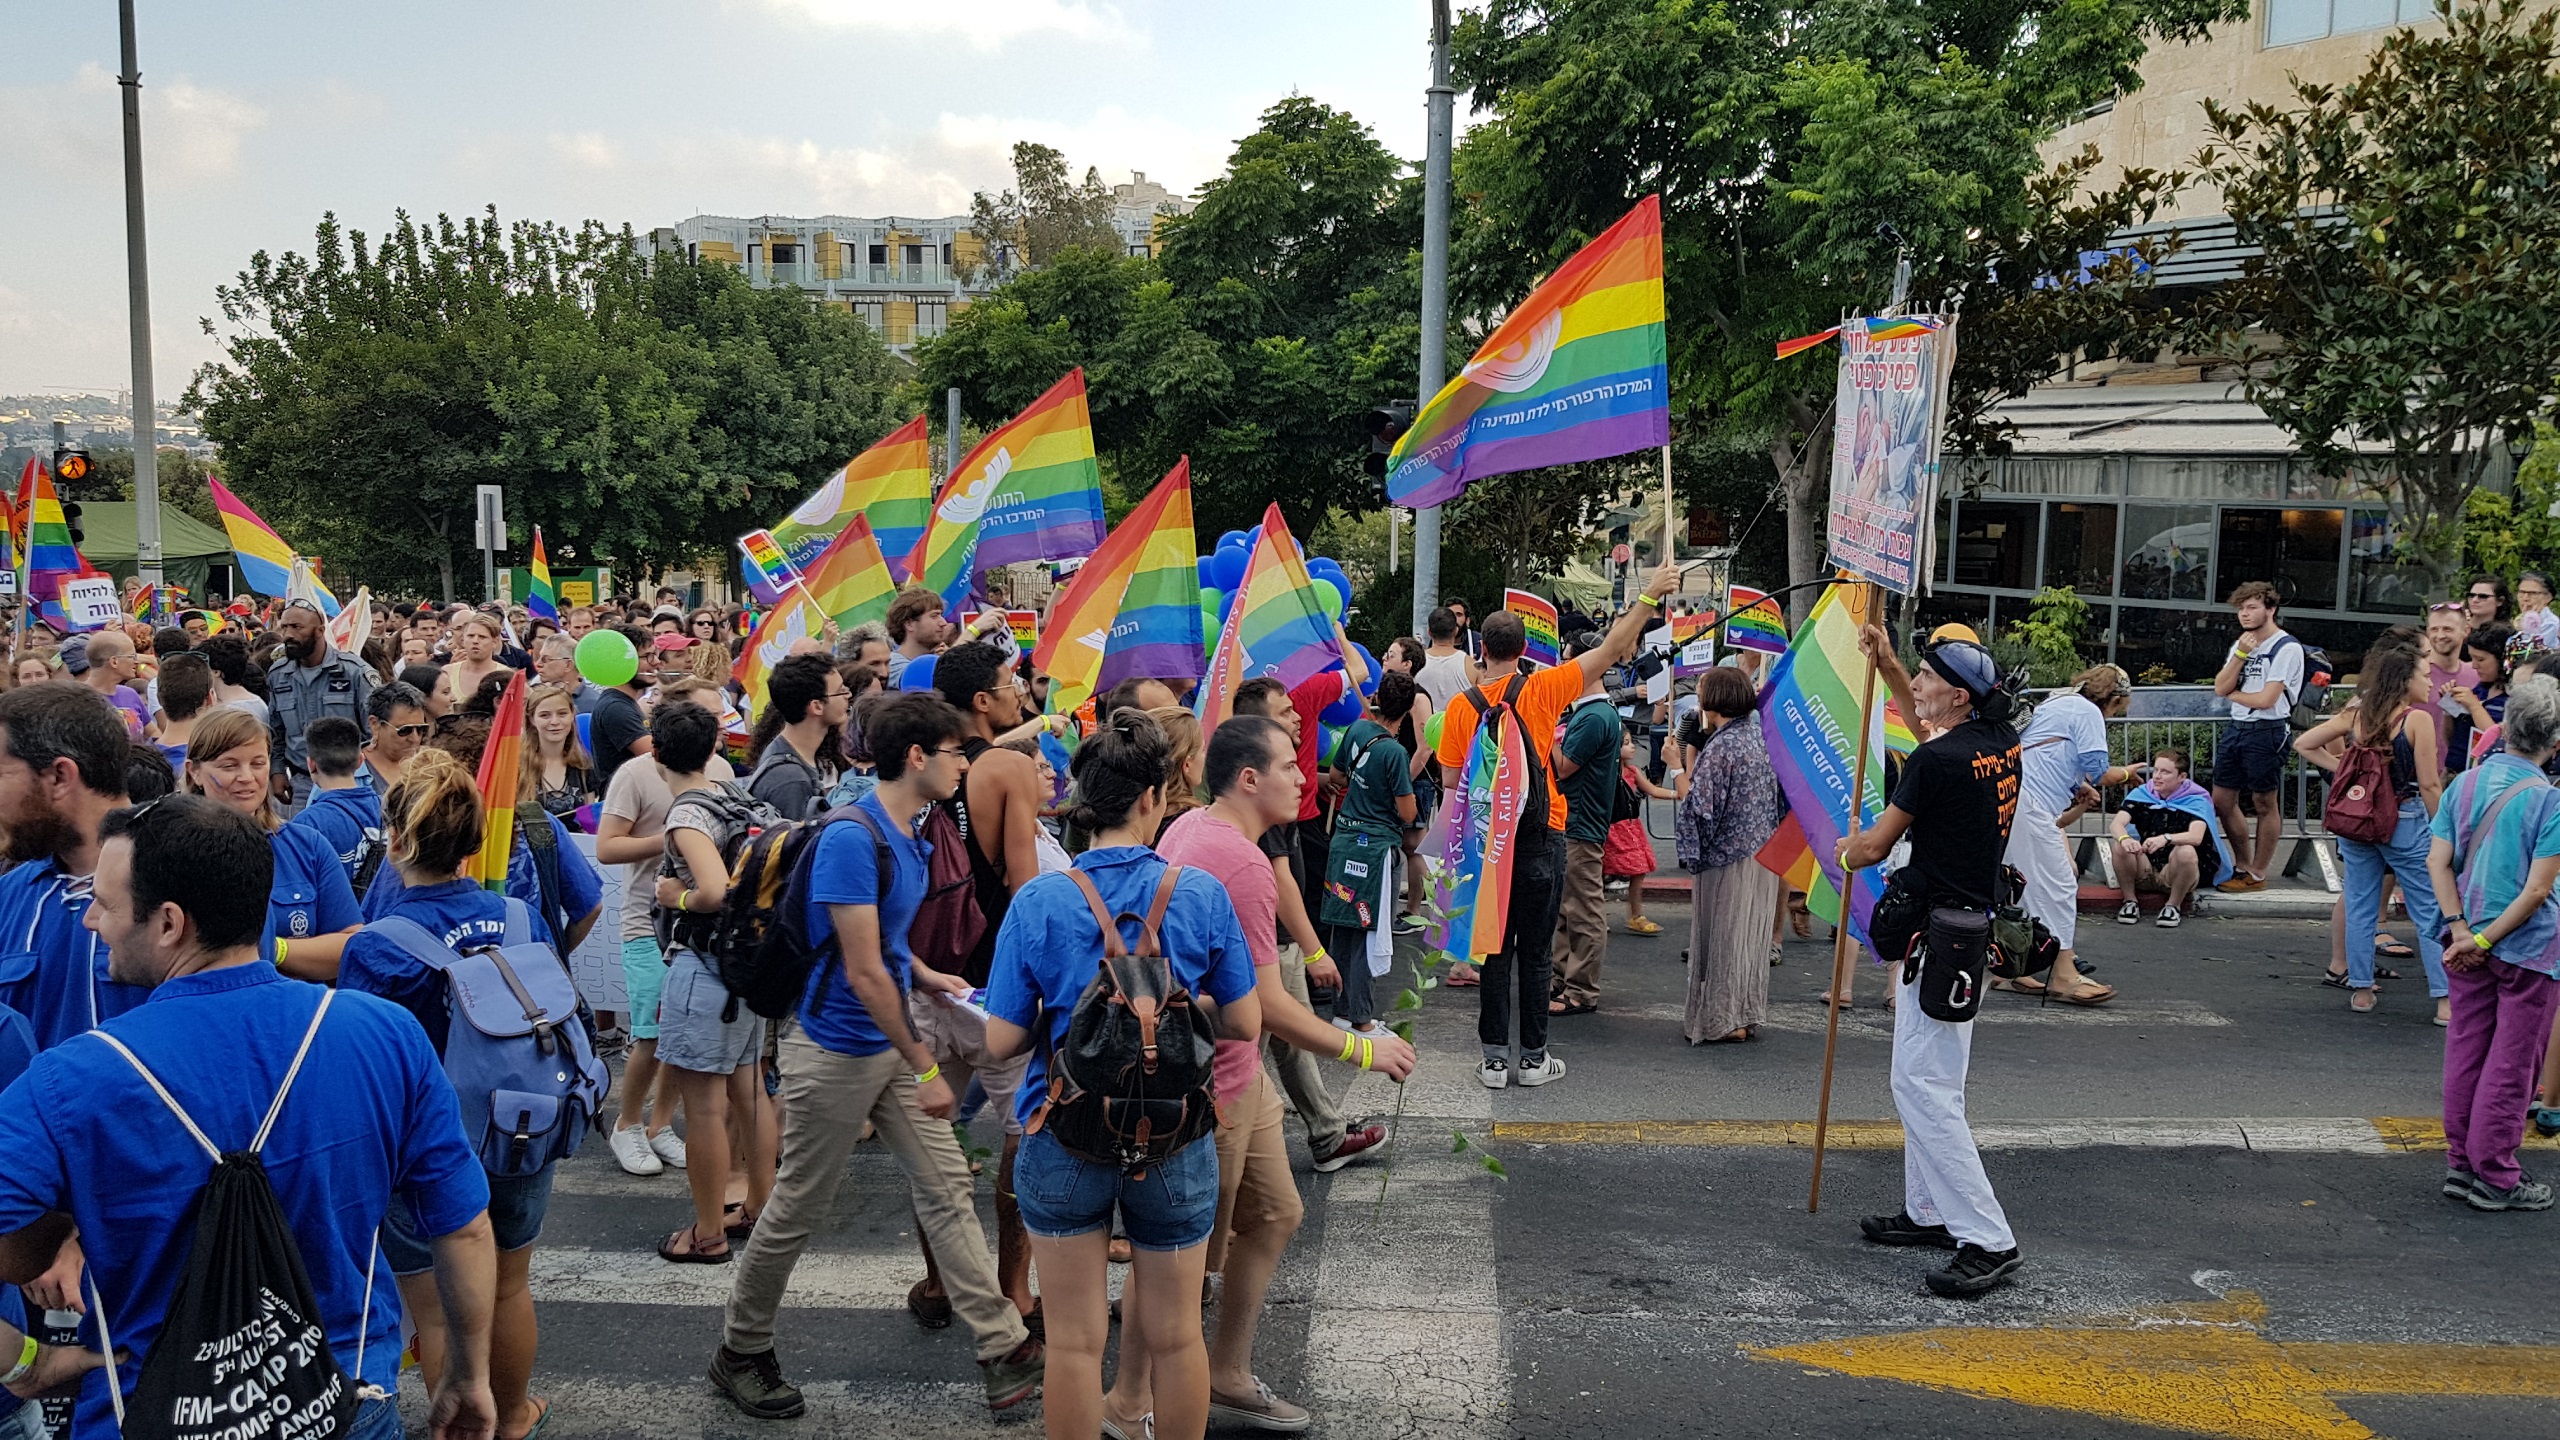 Jerusalem Hosts Gay Pride Parade After Year Off for Coronavirus The